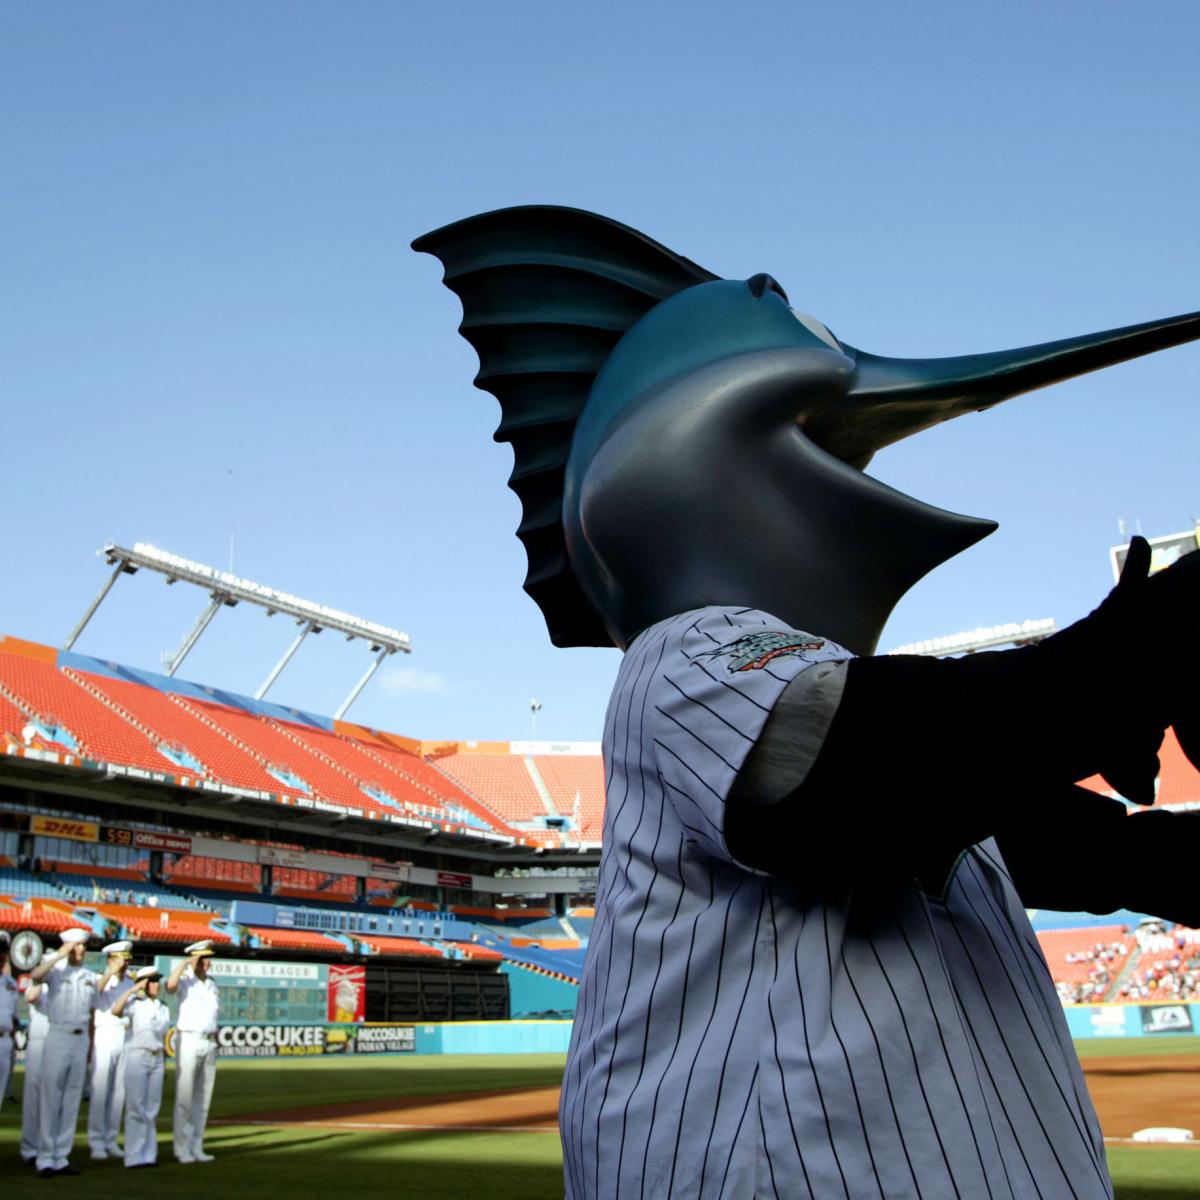 Jared Block on X: Marlins man is at the wrong ballpark today